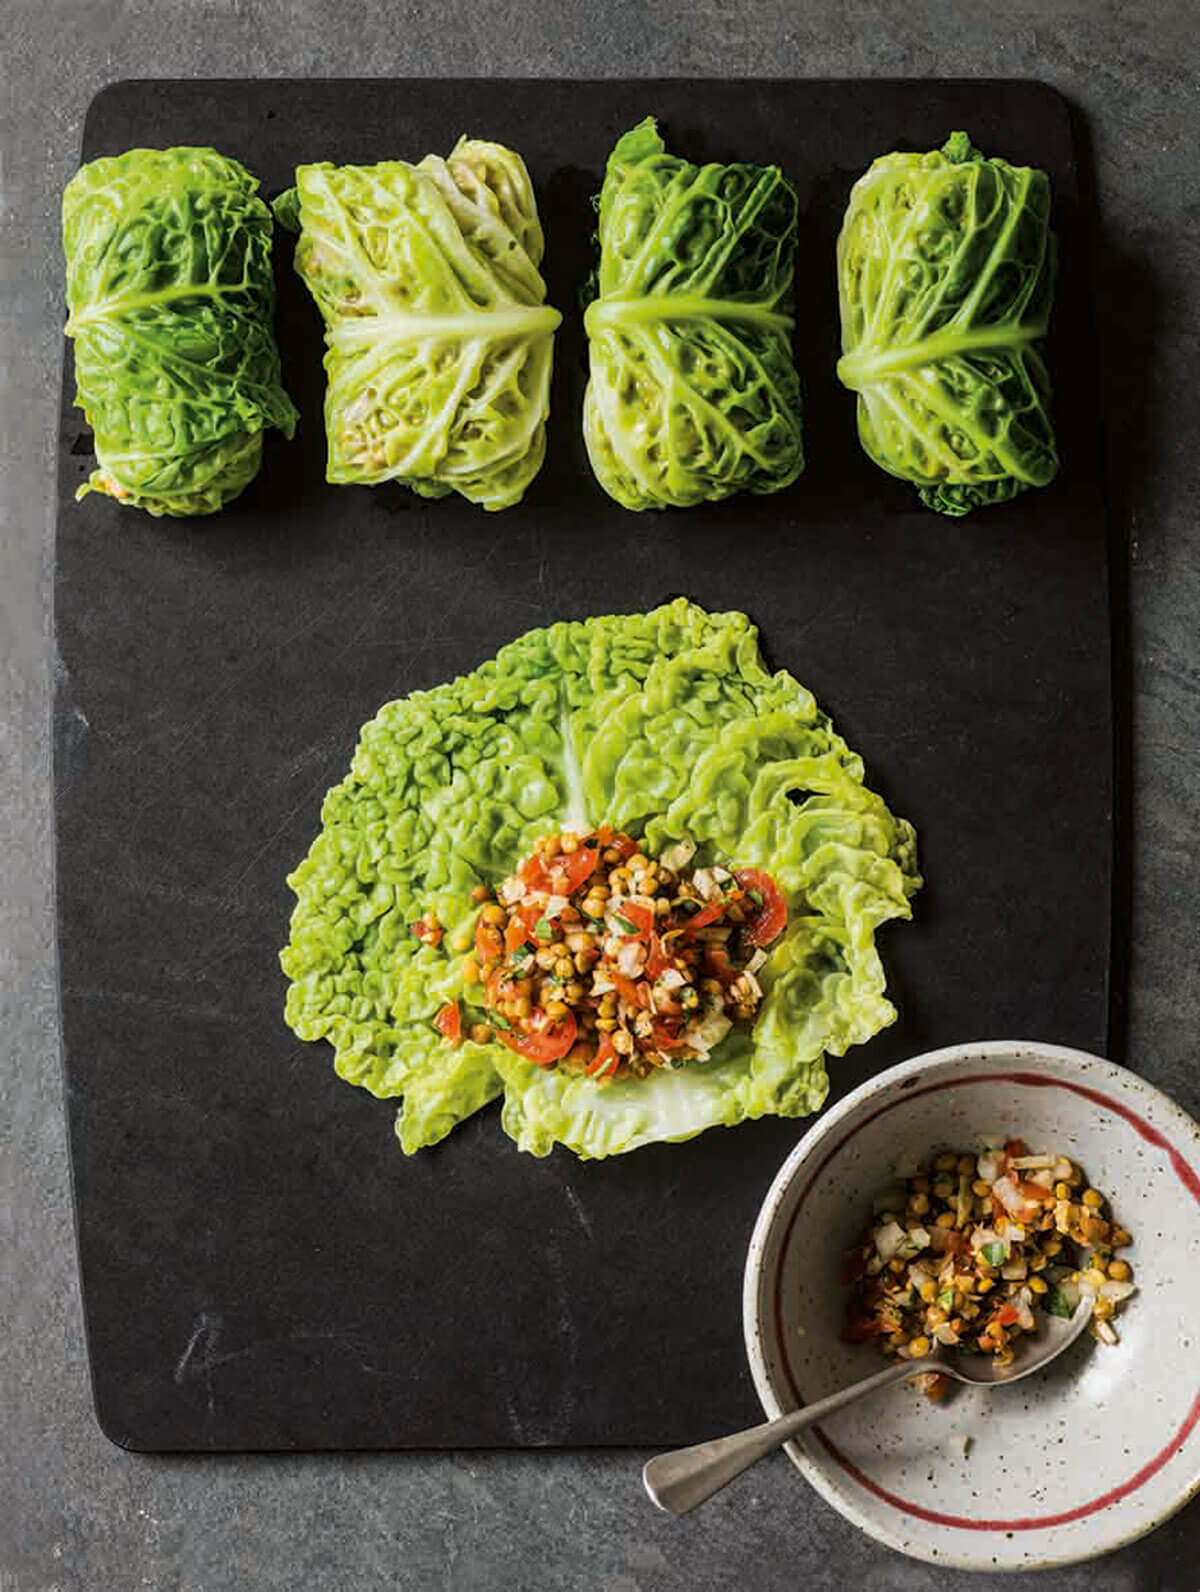 Stuffed cabbage leaves baked in tomato sauce, from The Middle Eastern Vegetarian Cookbook